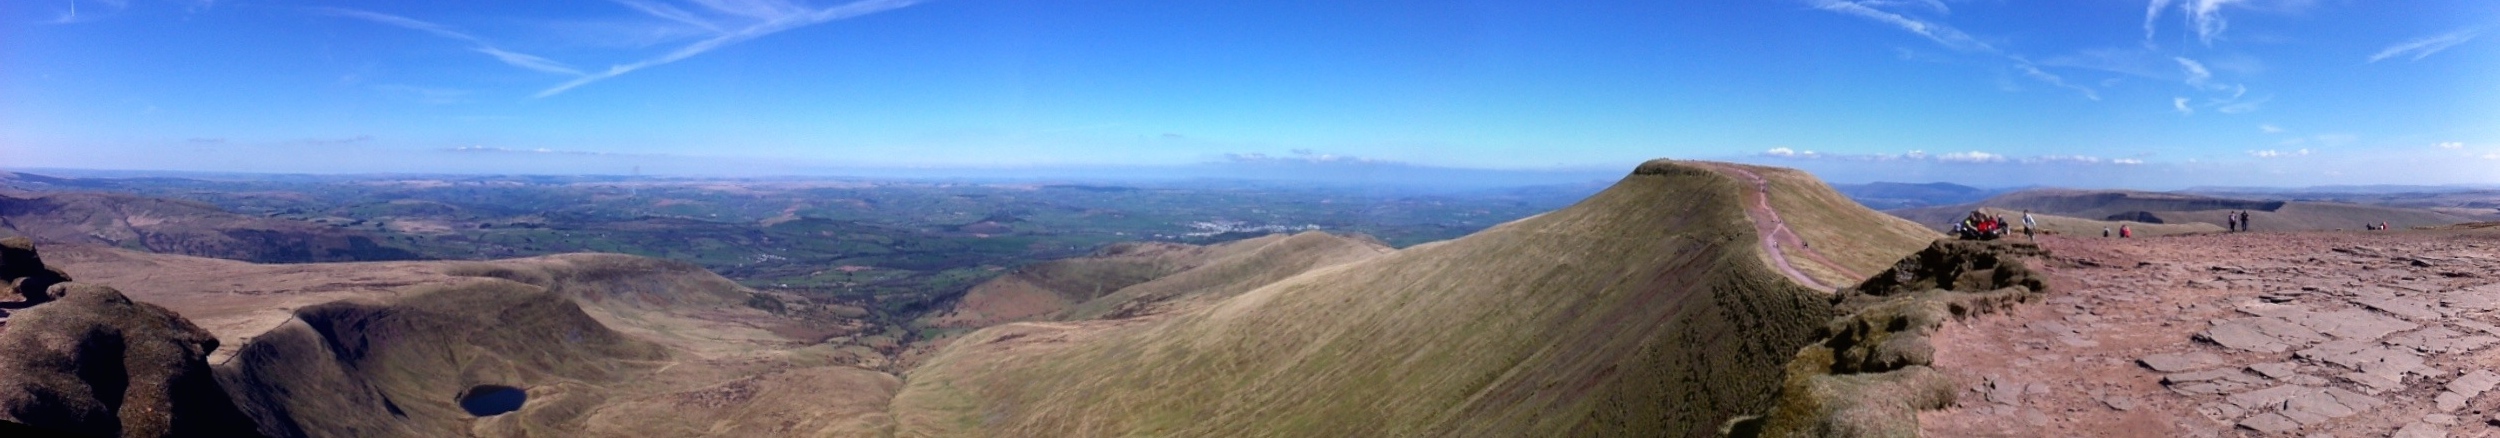 Panorama of the Welsh Landscape